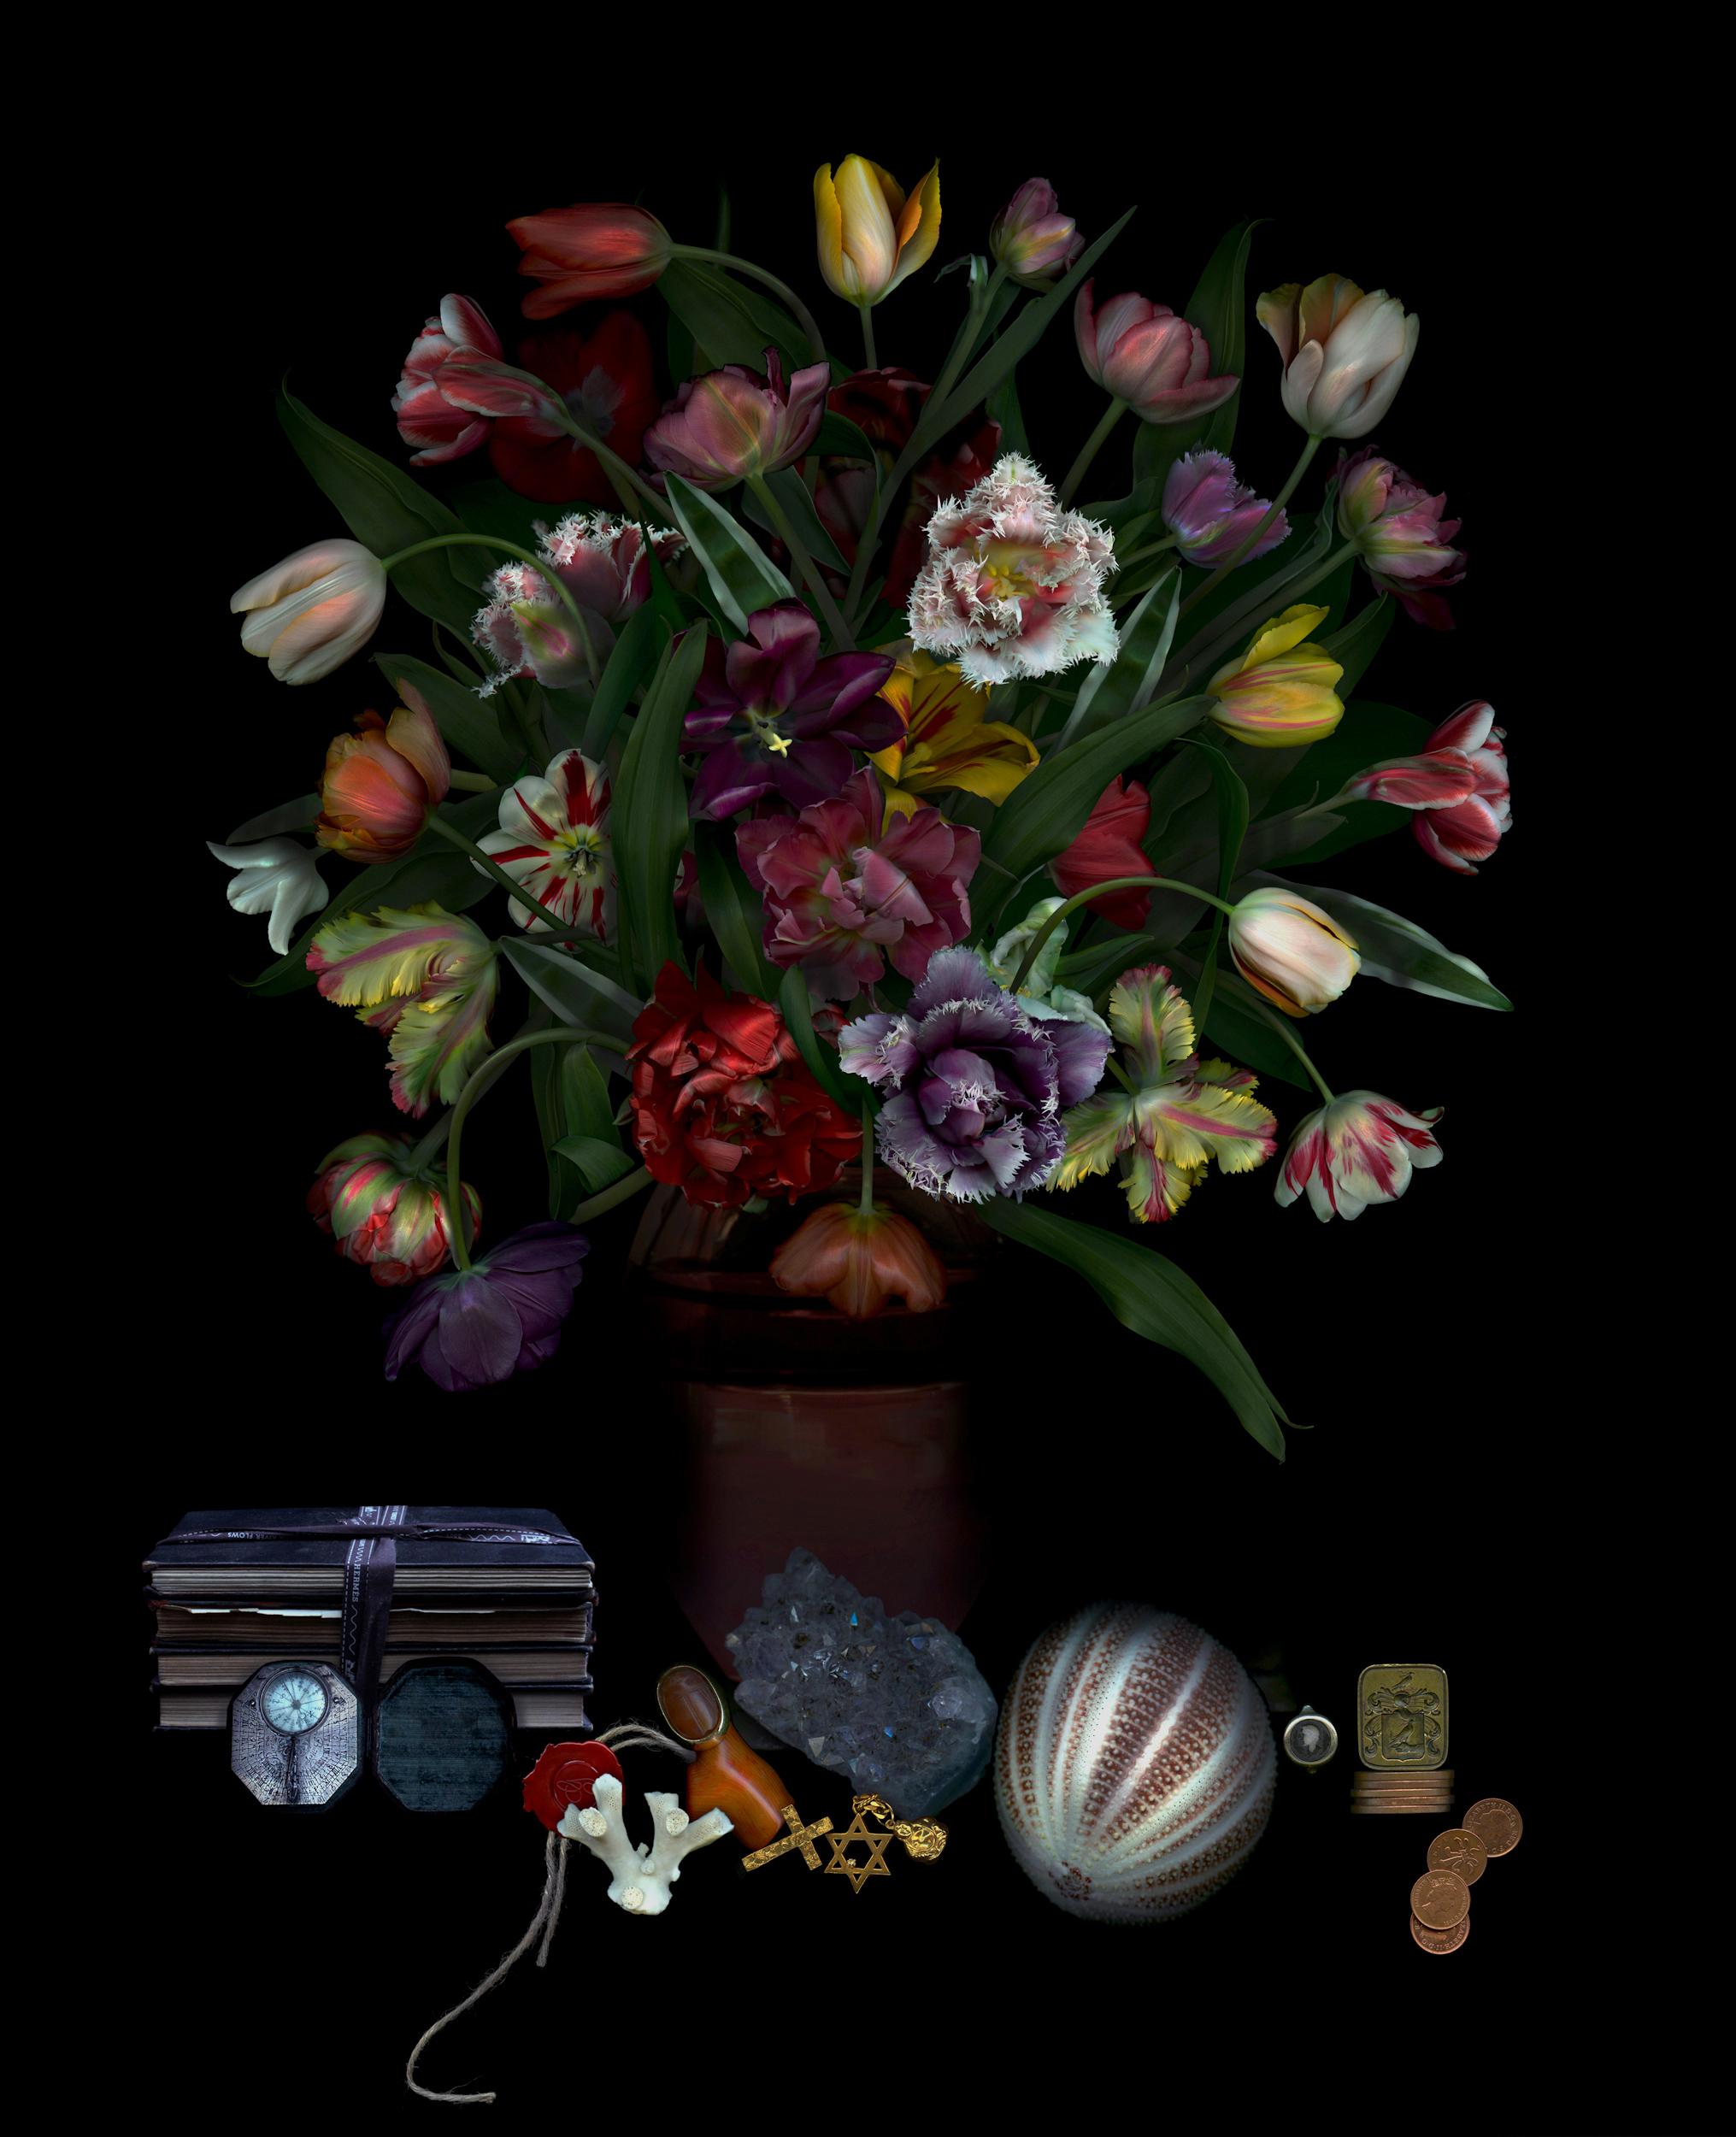 Zoltan Gerliczki Still-Life Photograph - Still Life with Tulips. Flowers. Digital Collage Color Photograph